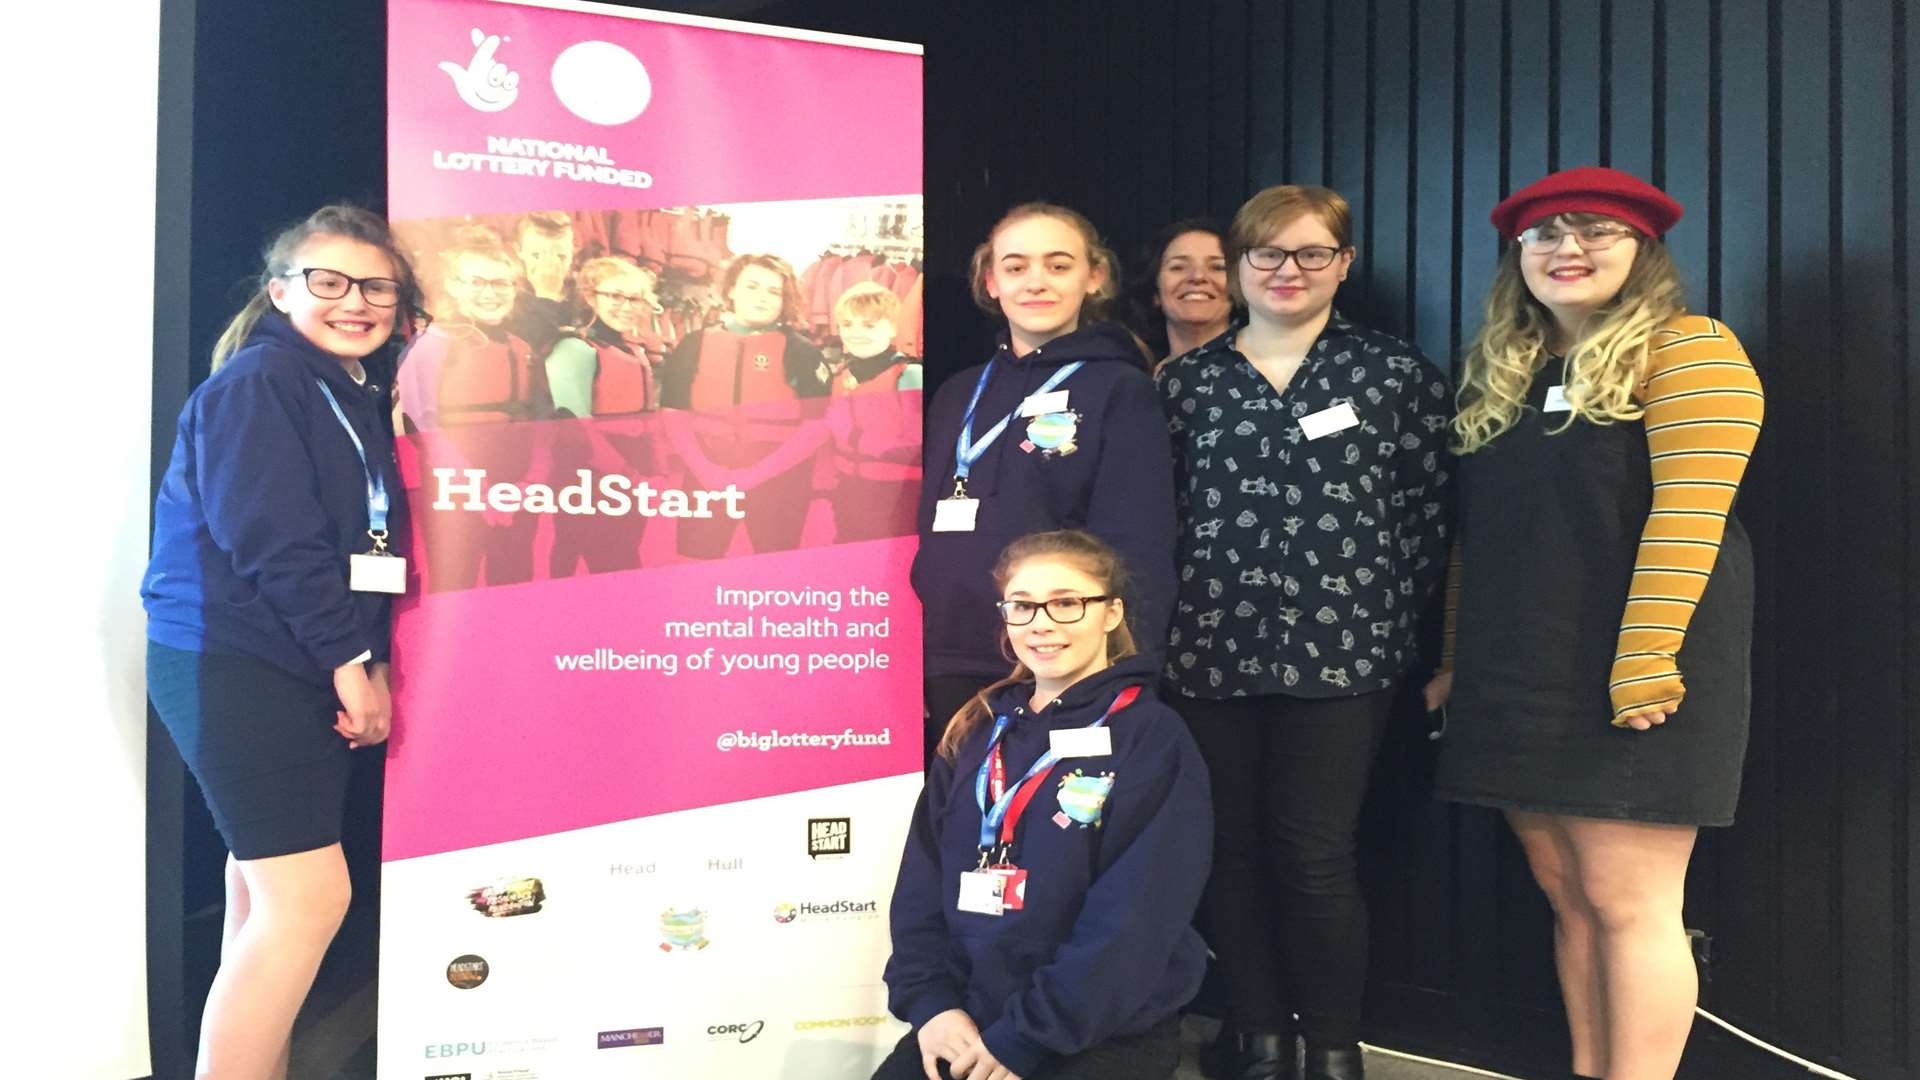 The HeadStart Kent event with young people and officials. Pippa Stickells, Lizzy Parker,, Mia Adams, Angela Ford, Charlotte Swaine and Millie May. Picture courtesy of Kent County Council